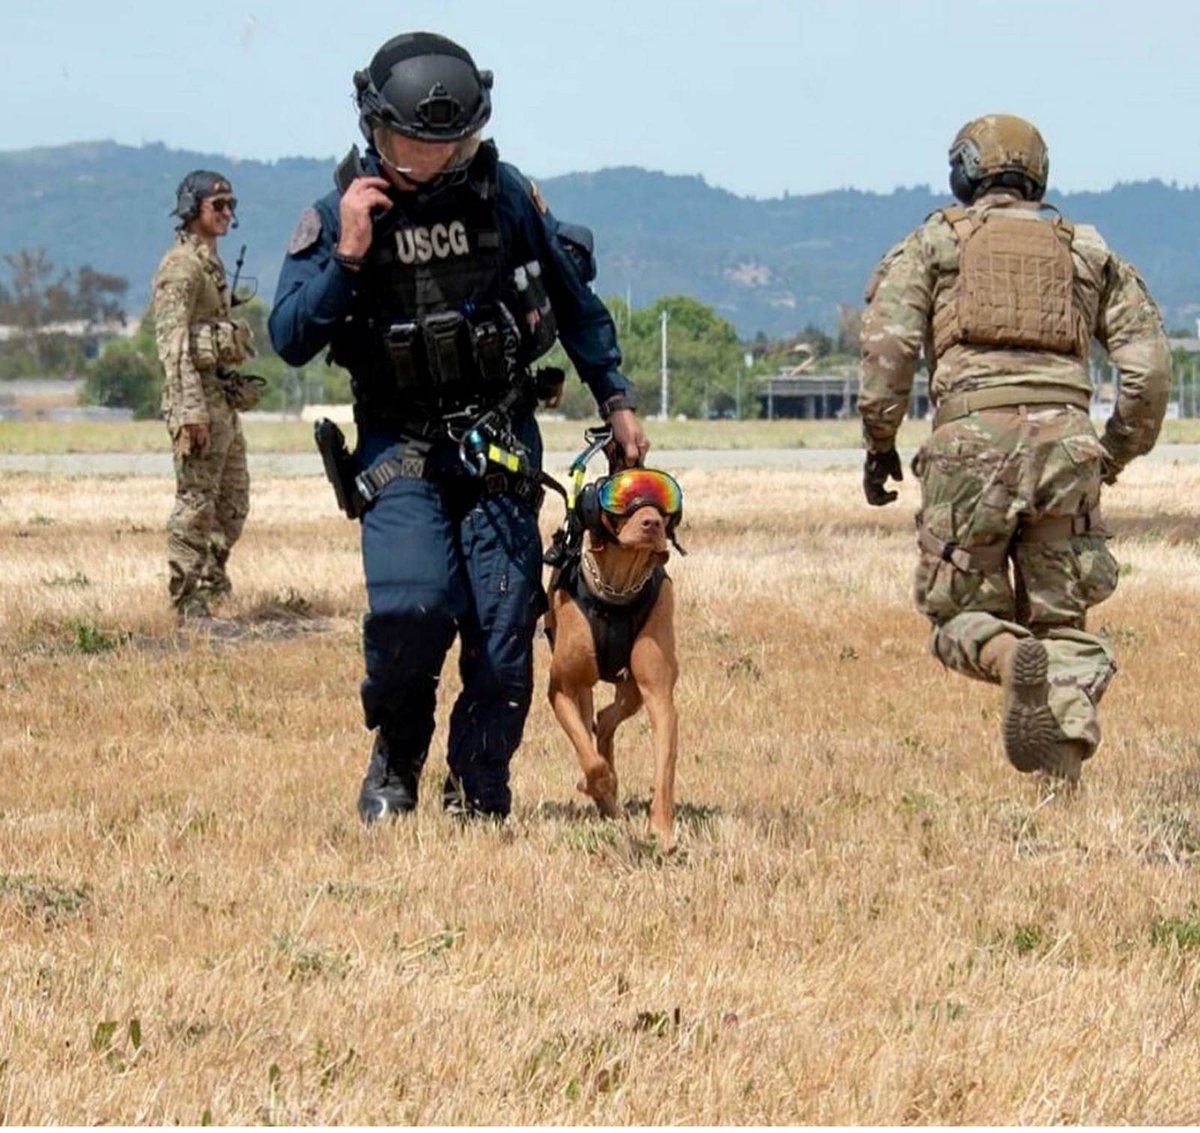 Check out USCG K9 Feco and his handler from MSST San Francisco getting some hang time while joint training with @Californiaairnationalguard.